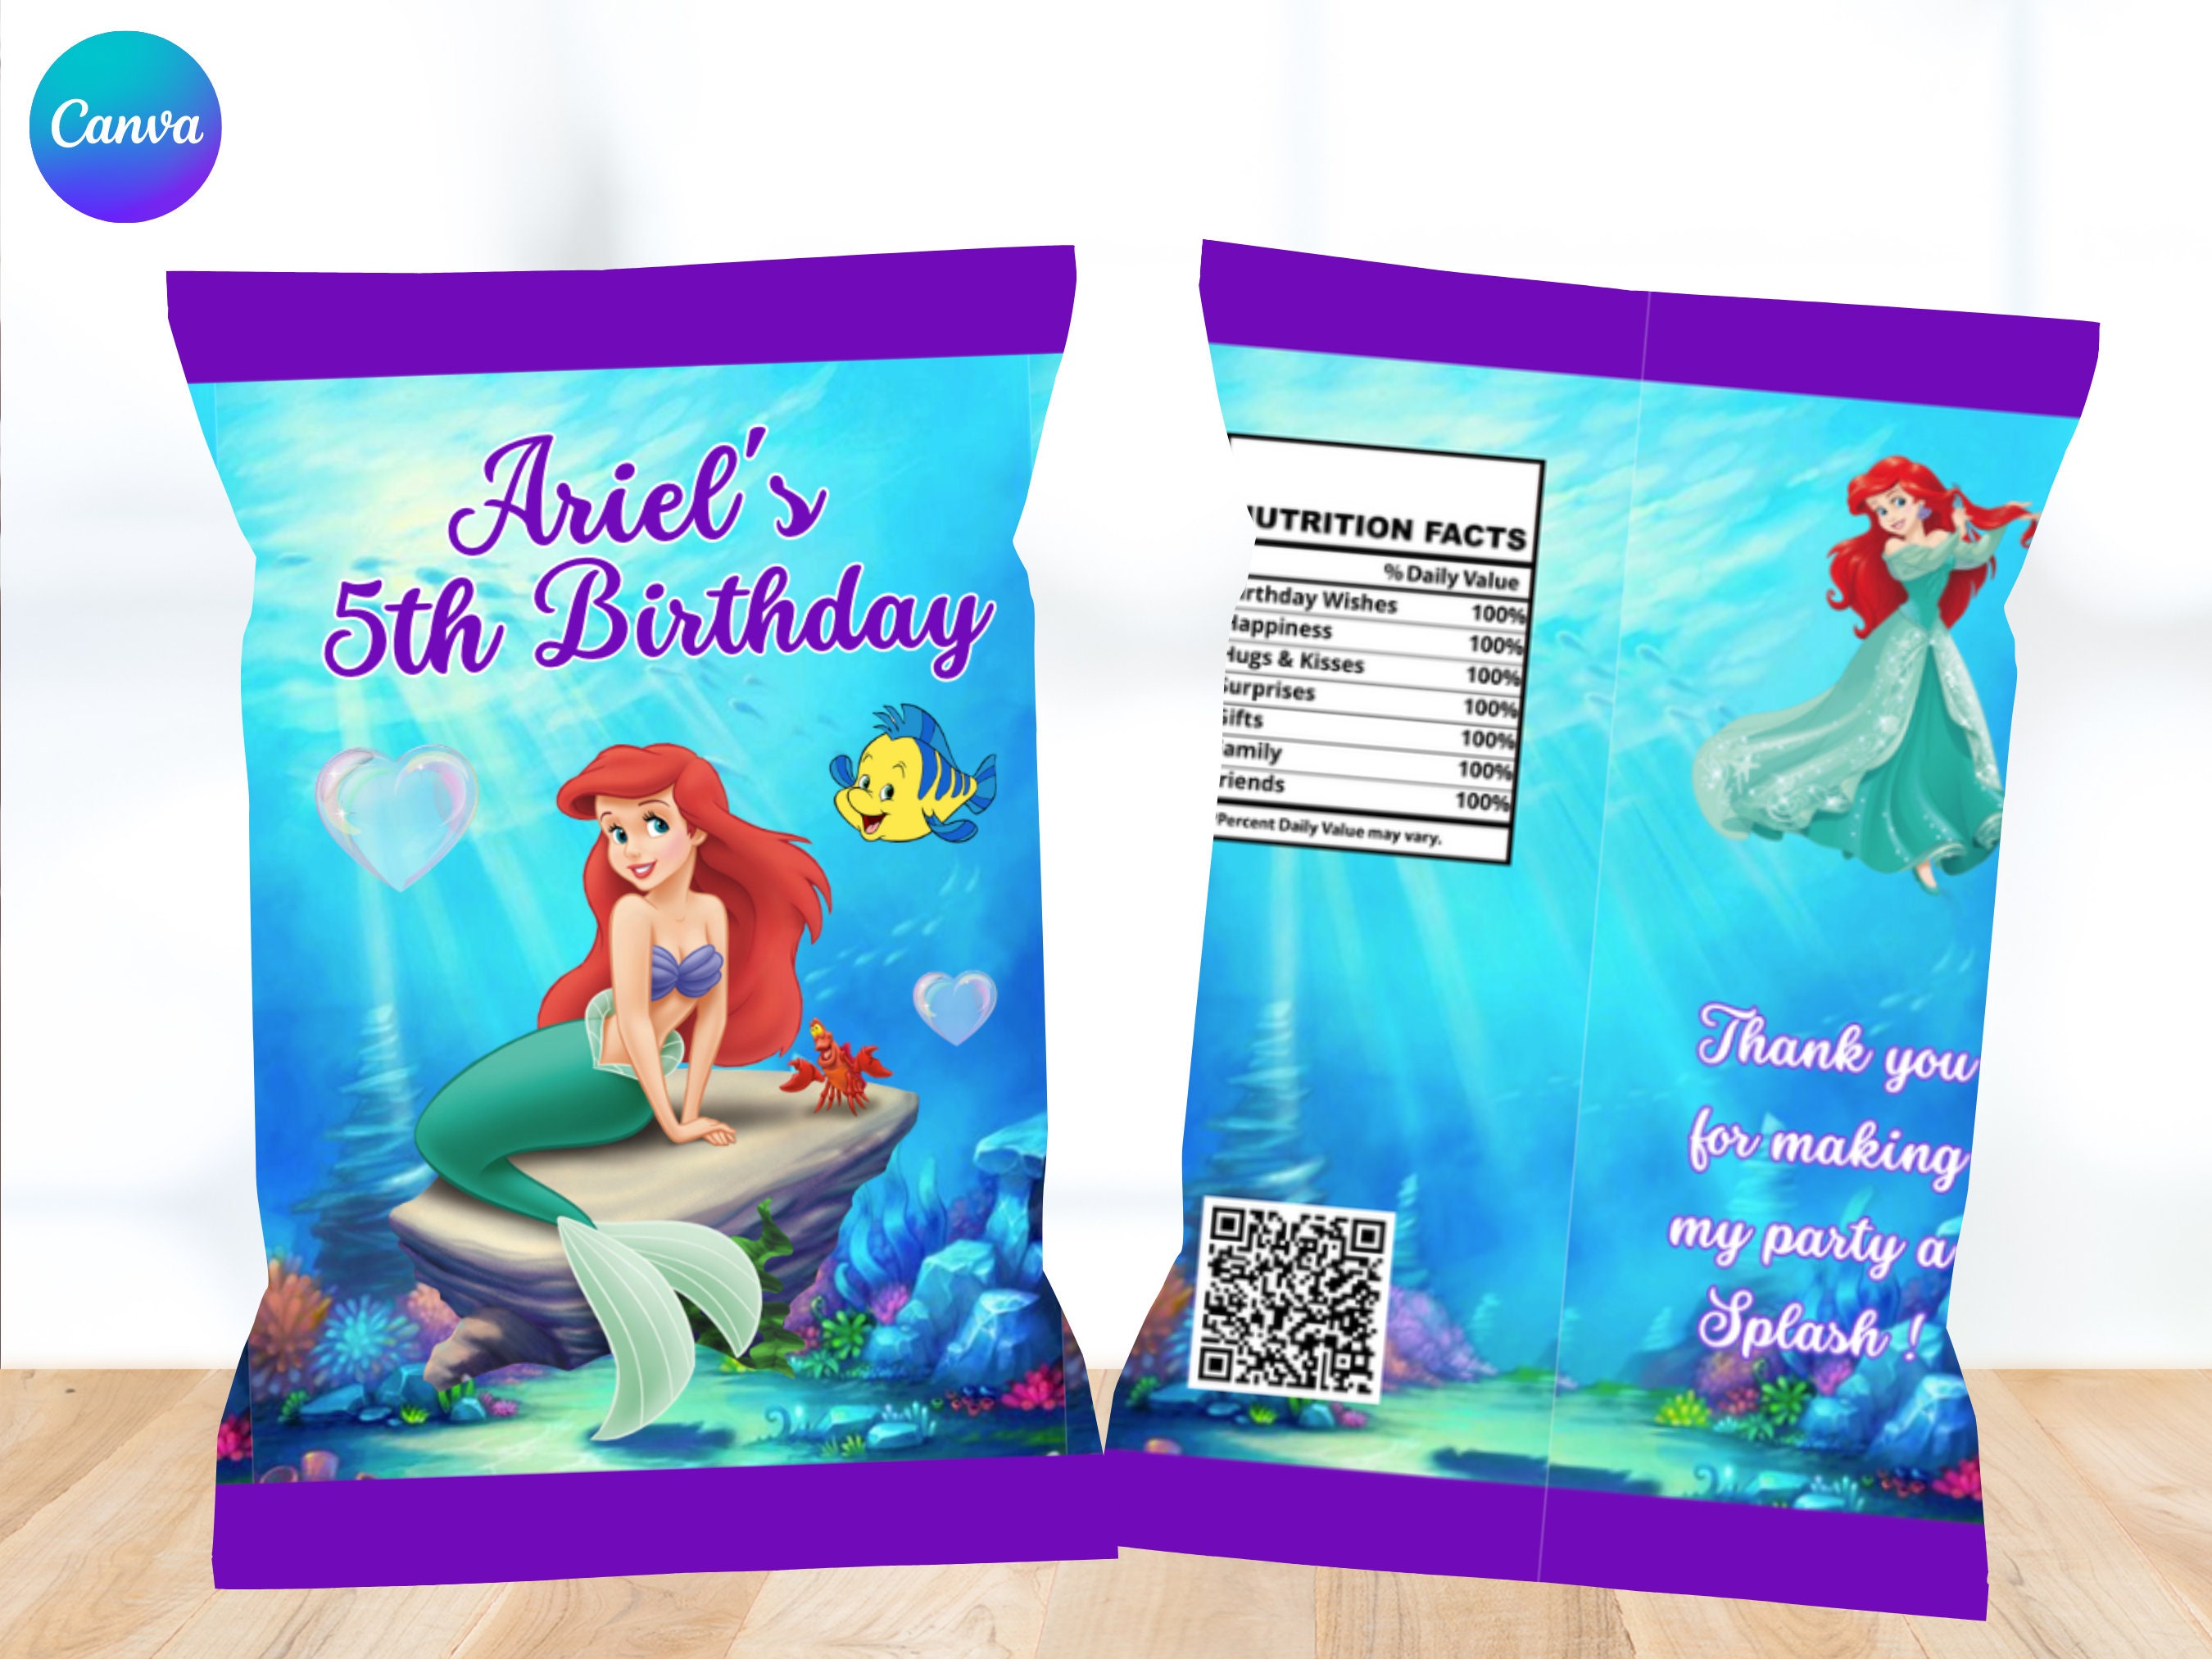 Little Mermaid Party Favor Bags, Ariel Little Mermaid Favor Bags, Little  Mermaid Party Decorations, Mermaid Favor Bags With Personalized Tag 